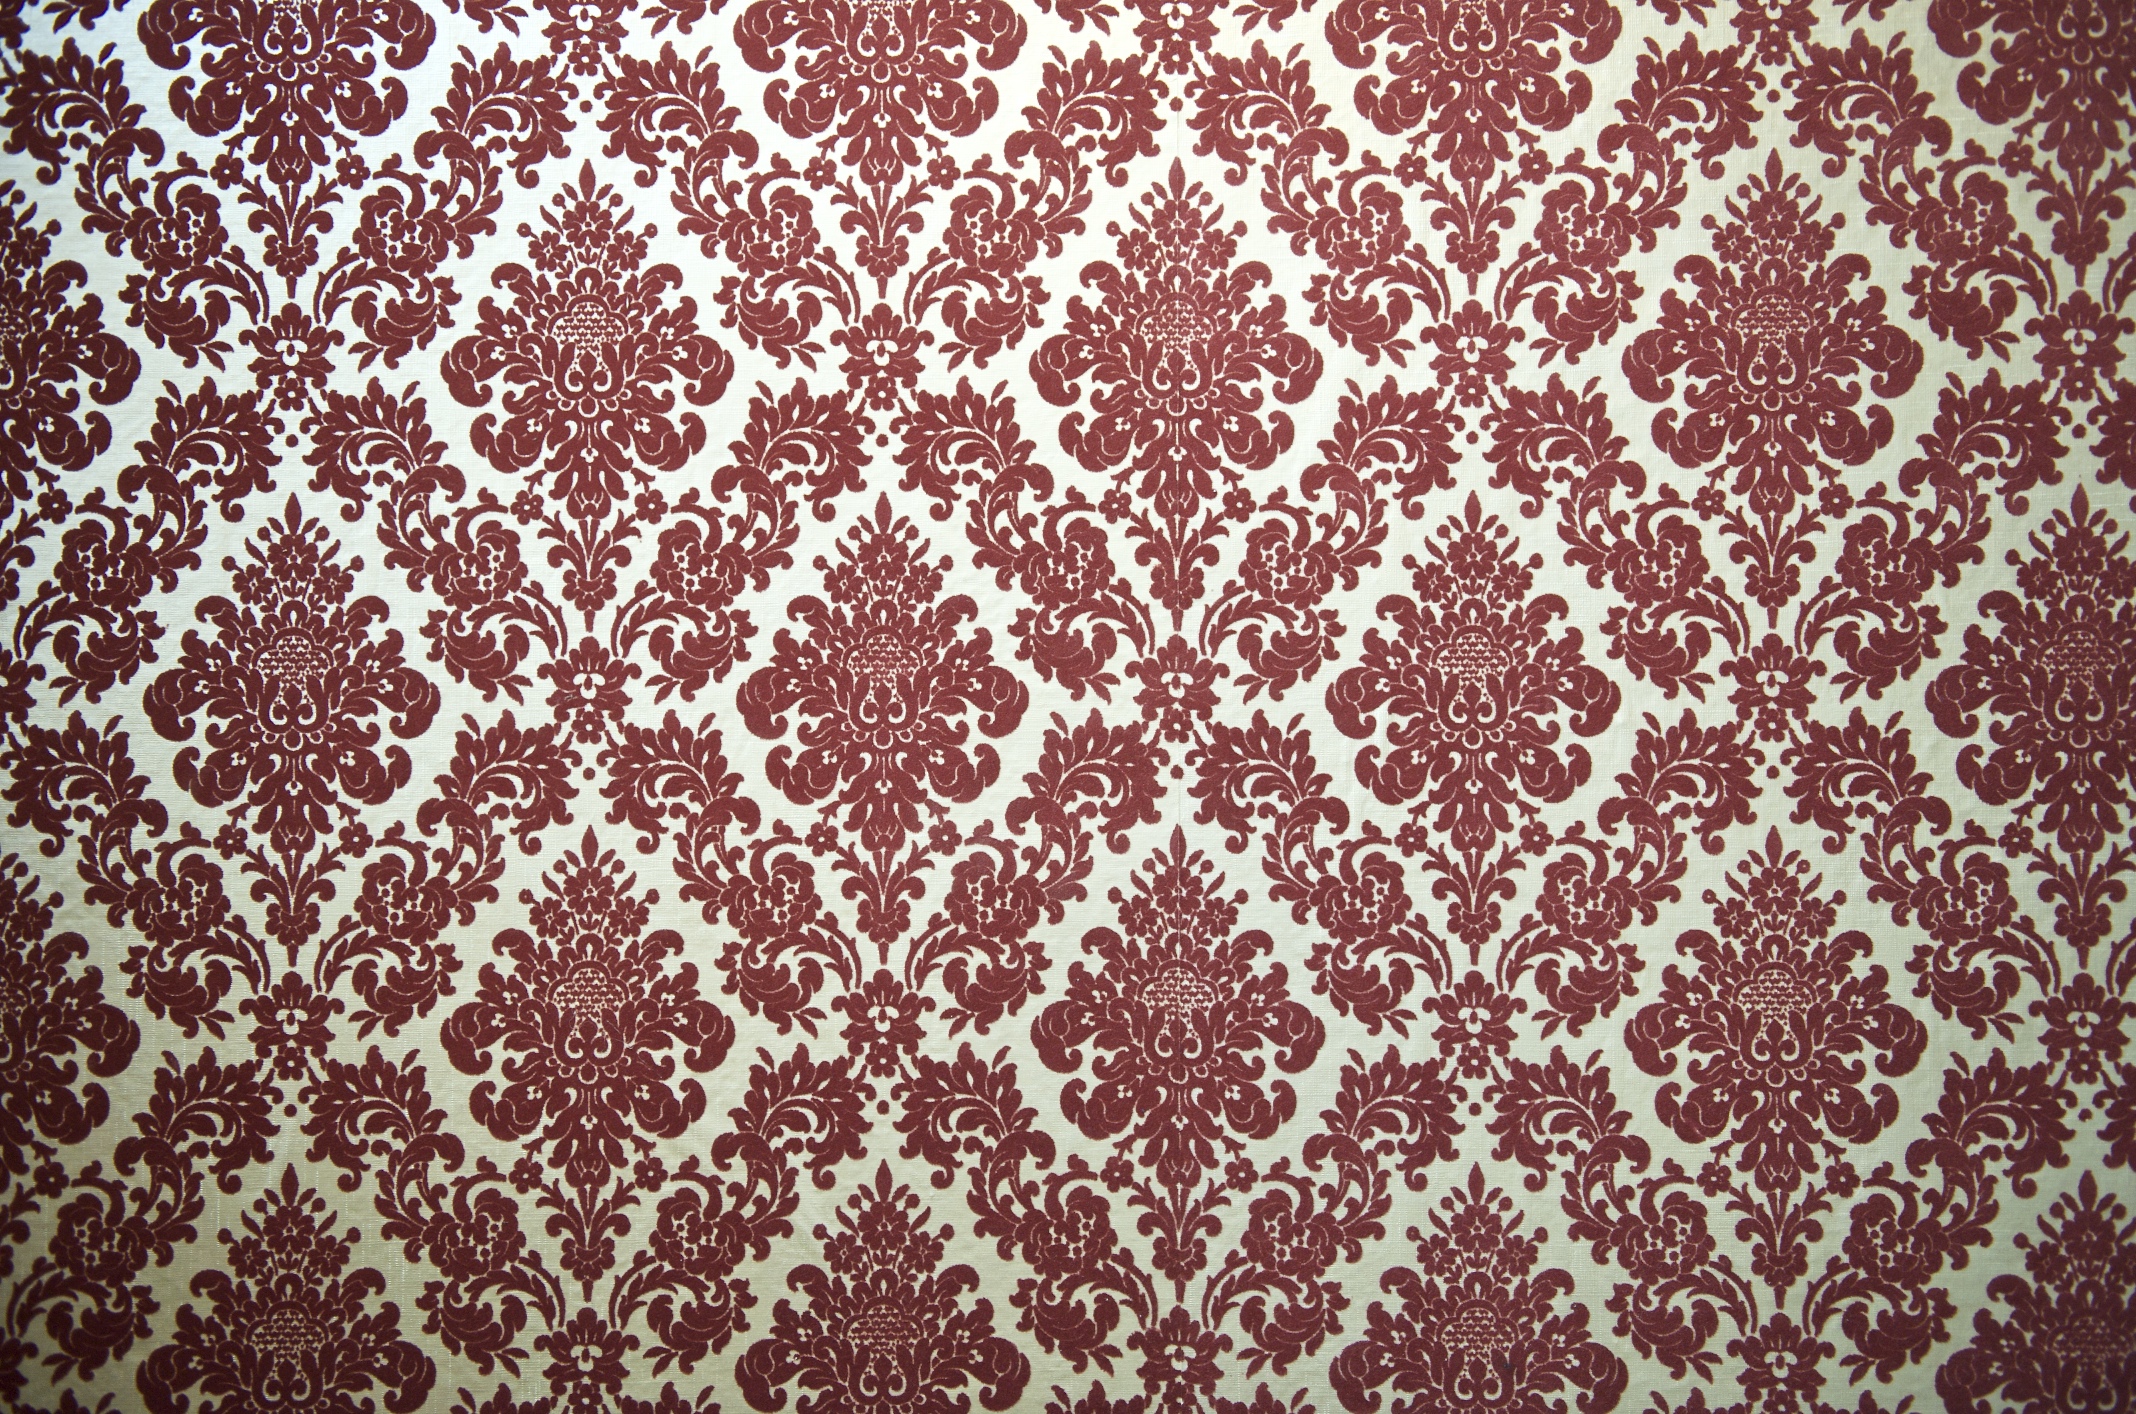 Red Wallpaper Vintage Flock With Red Damask Design On A White Background  Retro Vintage Style Stock Photo  Download Image Now  iStock